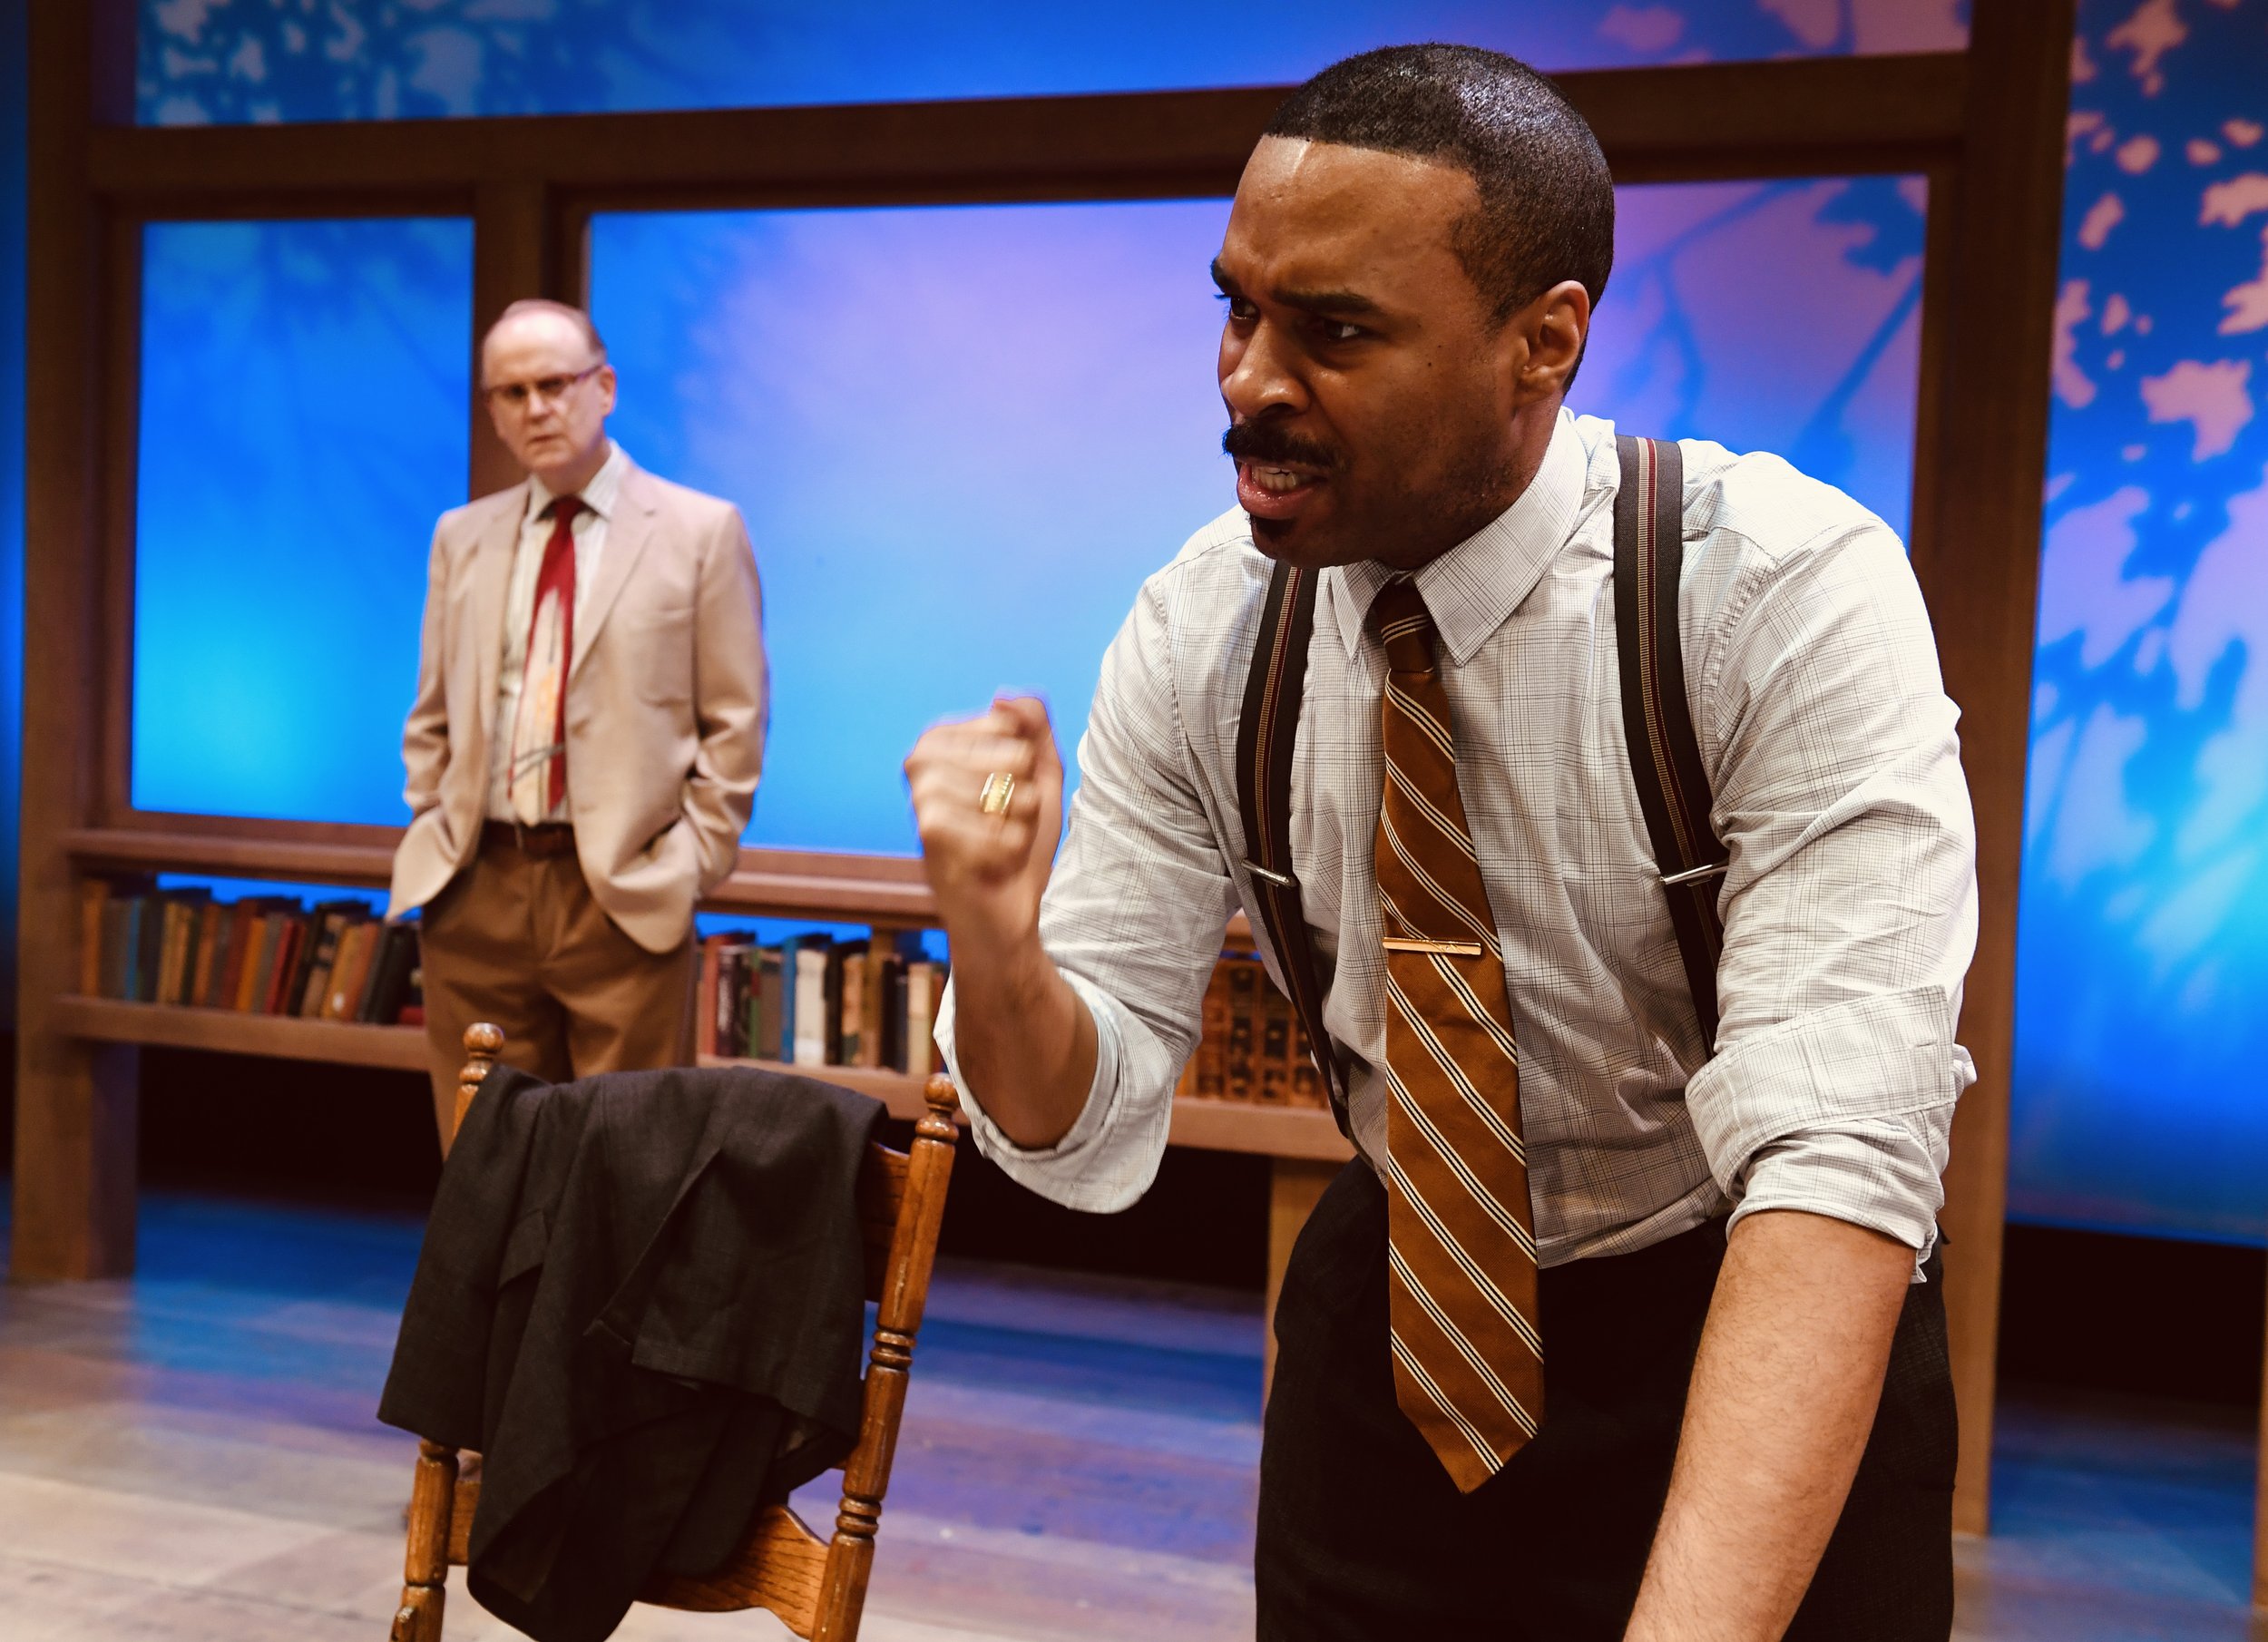  San Jose Stage Company’s West Coast Premiere of PEOPLE WHERE THEY ARE by ANTHONY CLARVOE. Directed BENNY SATO AMBUSH featuring MICHAEL CHAMPLIN as NED and TERRANCE AUSTIN SMITH* as JOHN.  January 31st though February 25th, 2024  Photo by DAVE LEPORI